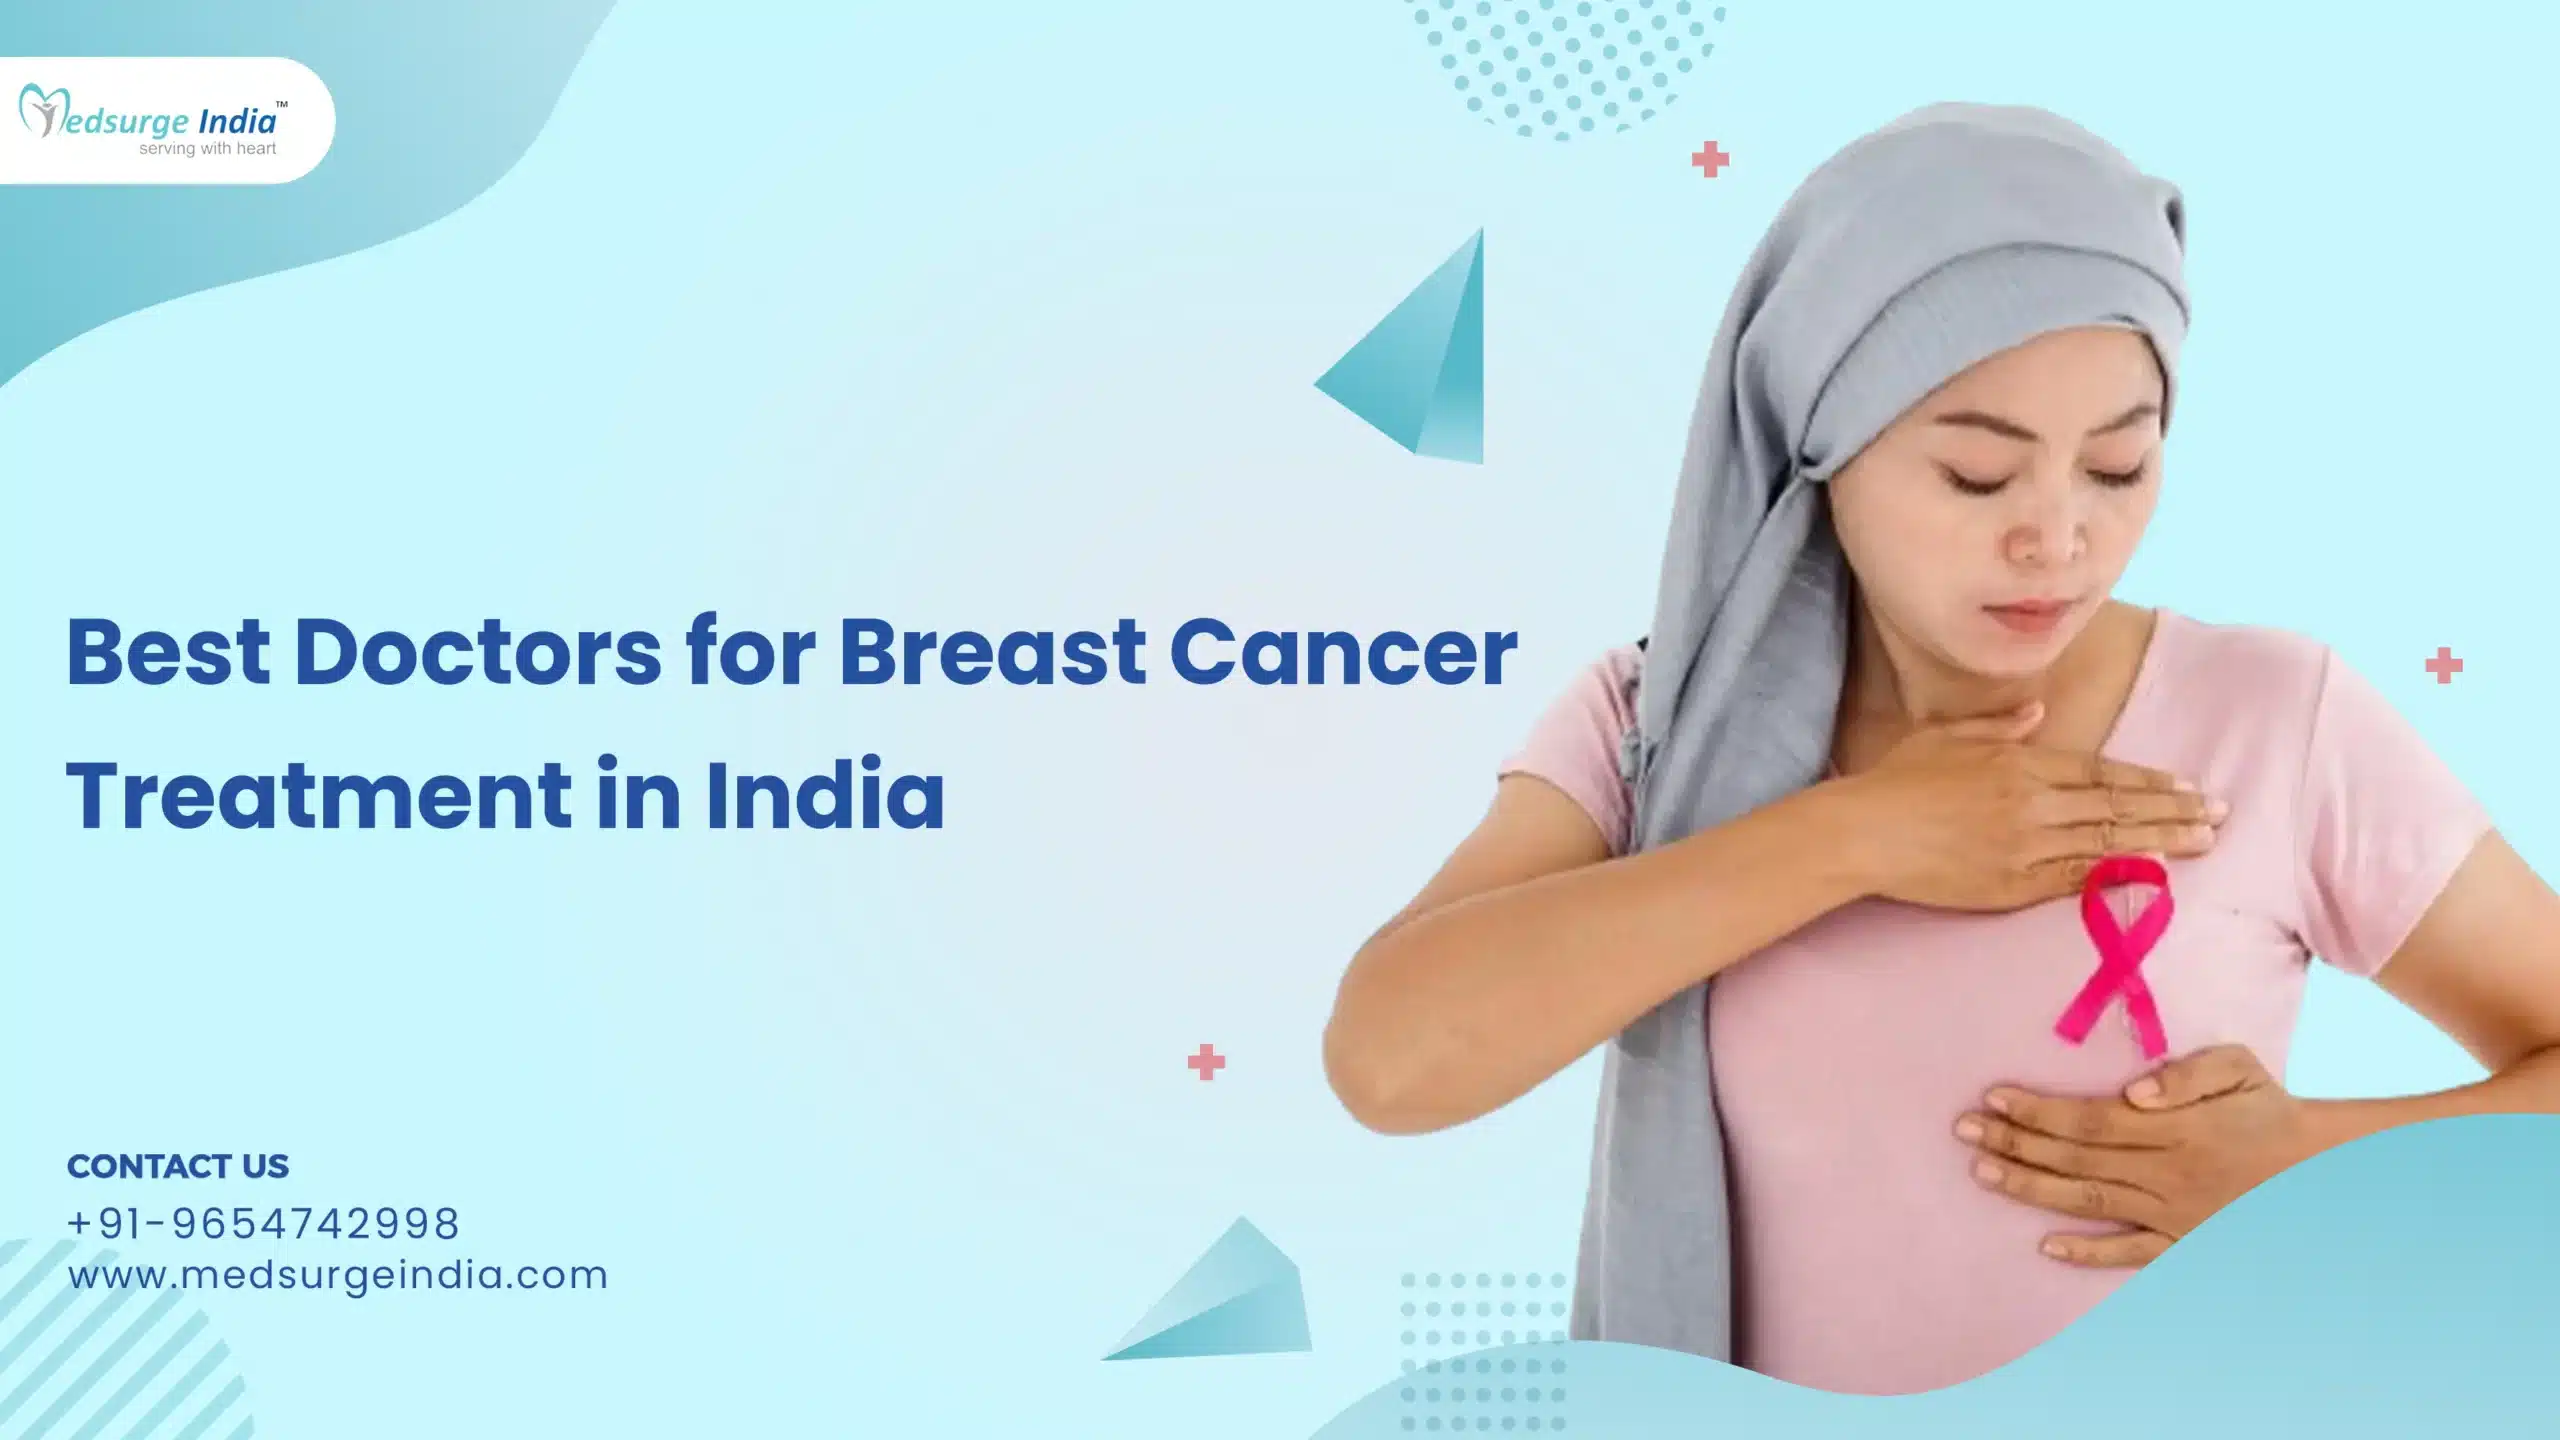 Best Doctors for Breast Cancer Treatment in India